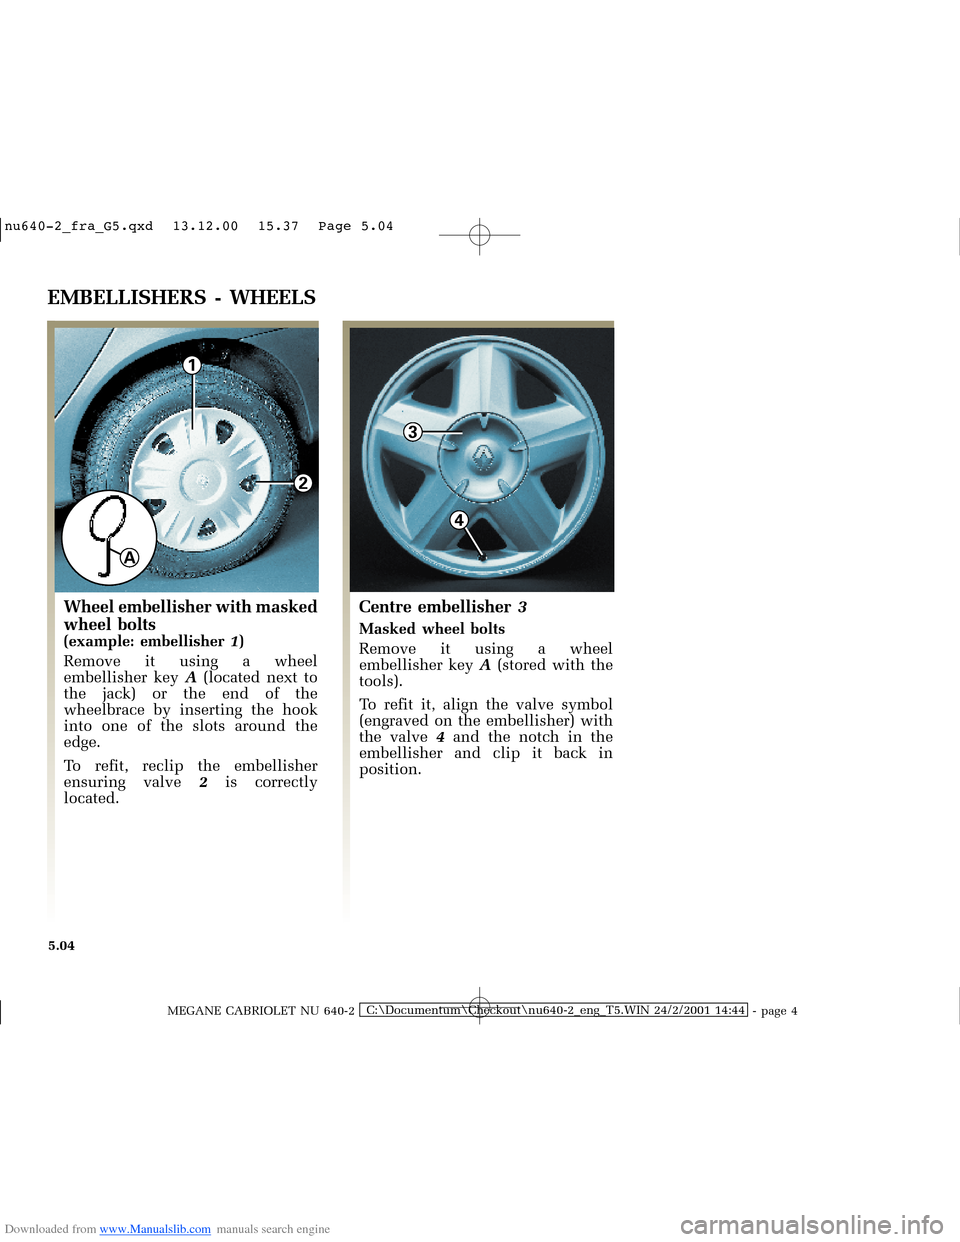 RENAULT MEGANE 2000 X64 / 1.G Owners Manual Downloaded from www.Manualslib.com manuals search engine 1
2
A
3
4
�Q�X������B�I�U�D�B�*���T�[�G� � ��������� � ������ � �3�D�J�H� ����
MEGANE CABRIOLET NU 640-2C:\Docum